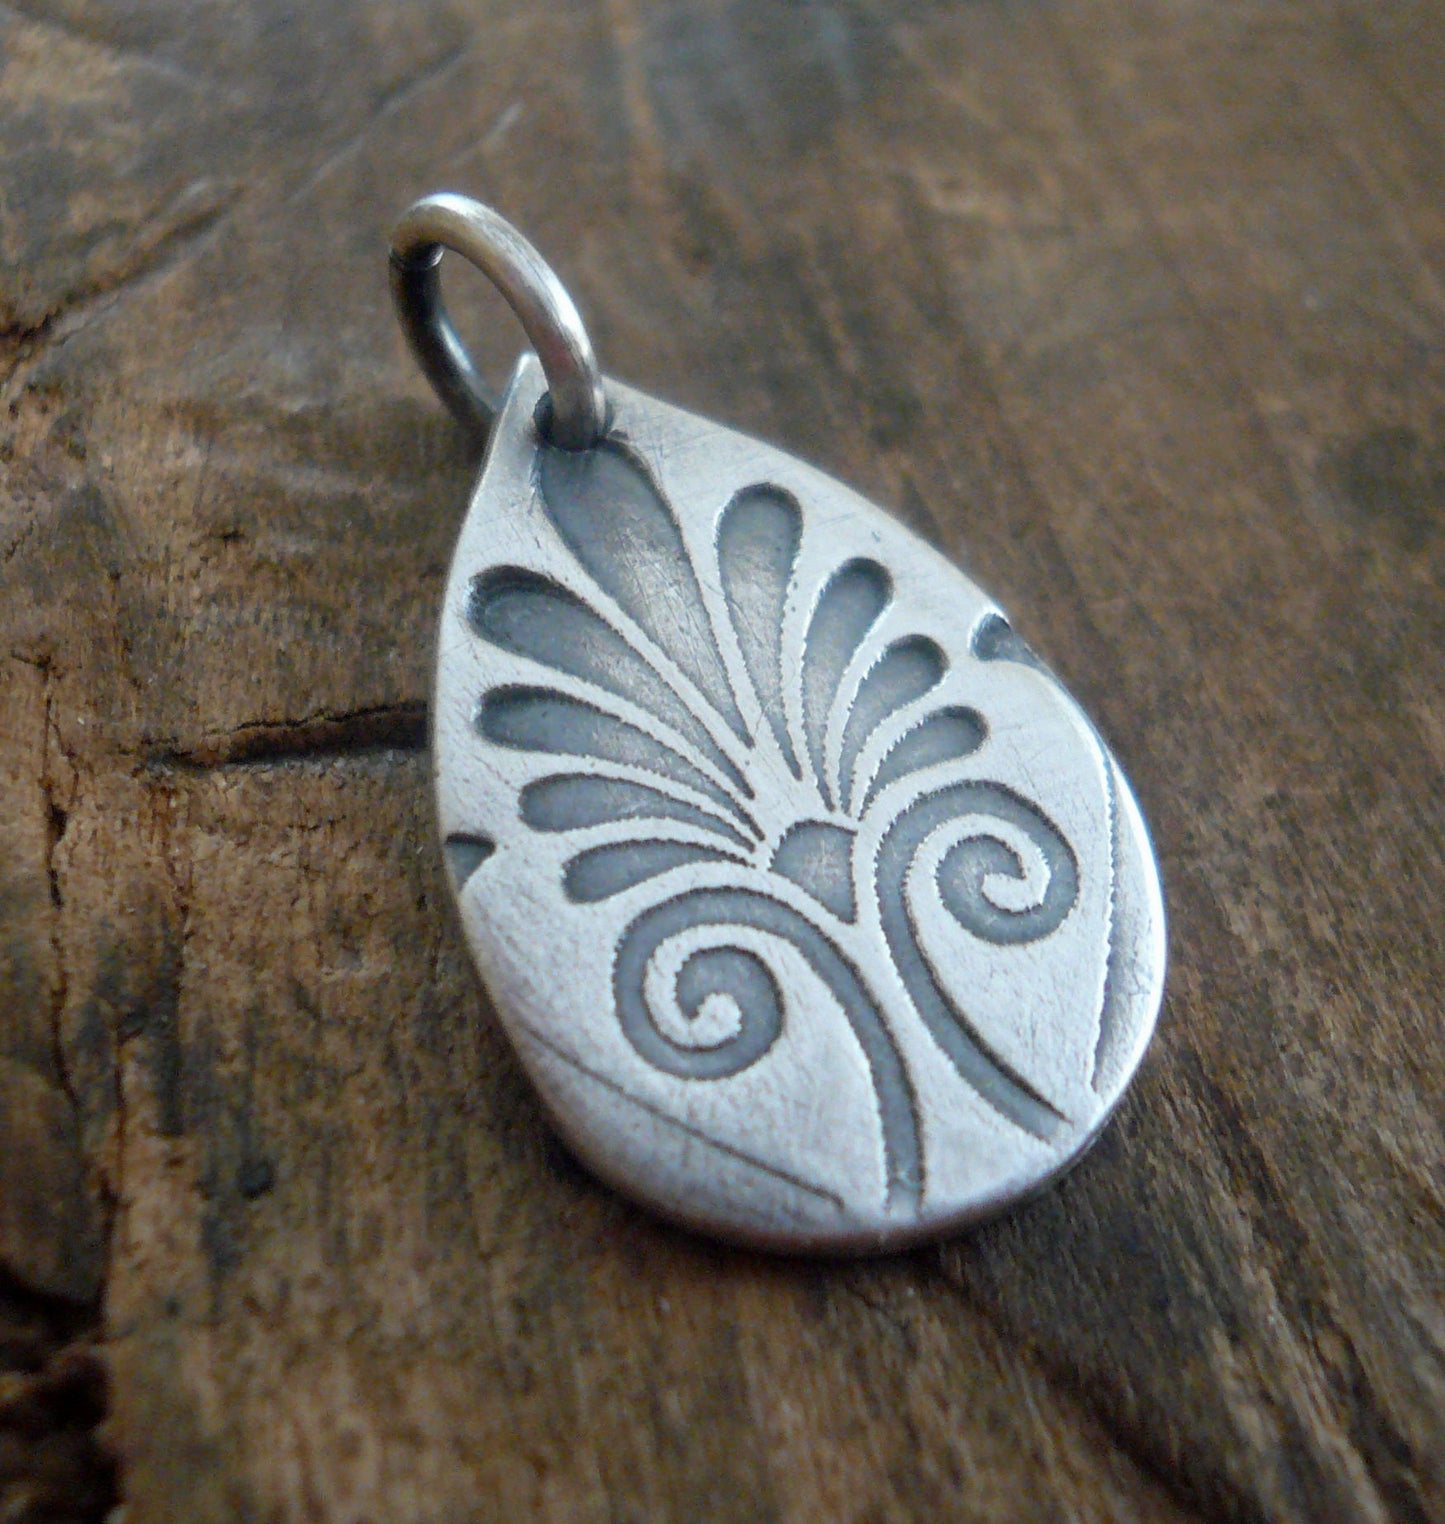 French Quarter Pendant- Handmade. Oxidized Fine Silver. Design Your Own Series. Choice of 1 Pendant